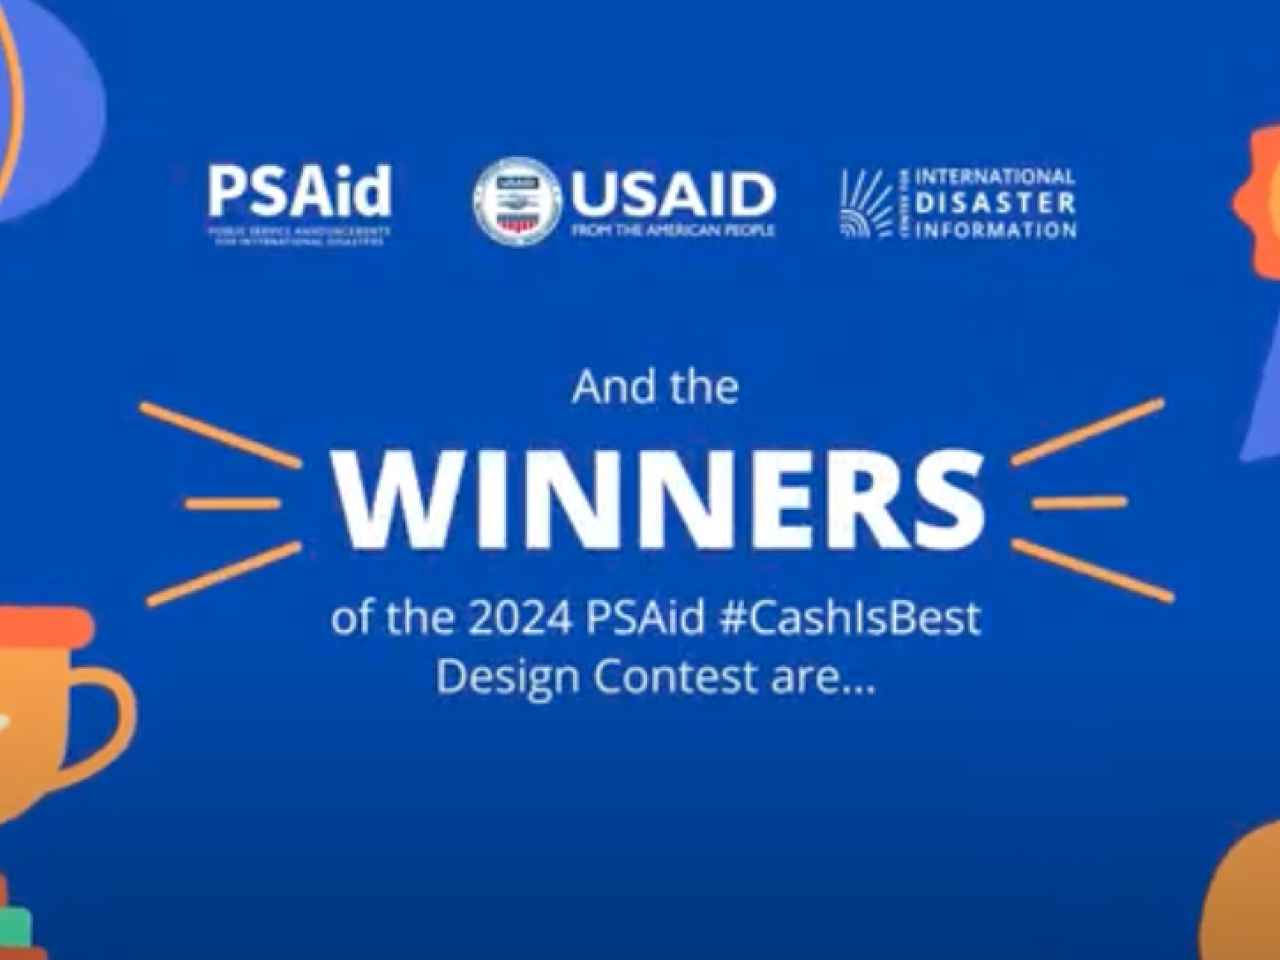 And the WINNERS of the 2024 PSAid CashIsBest Design Contest are...